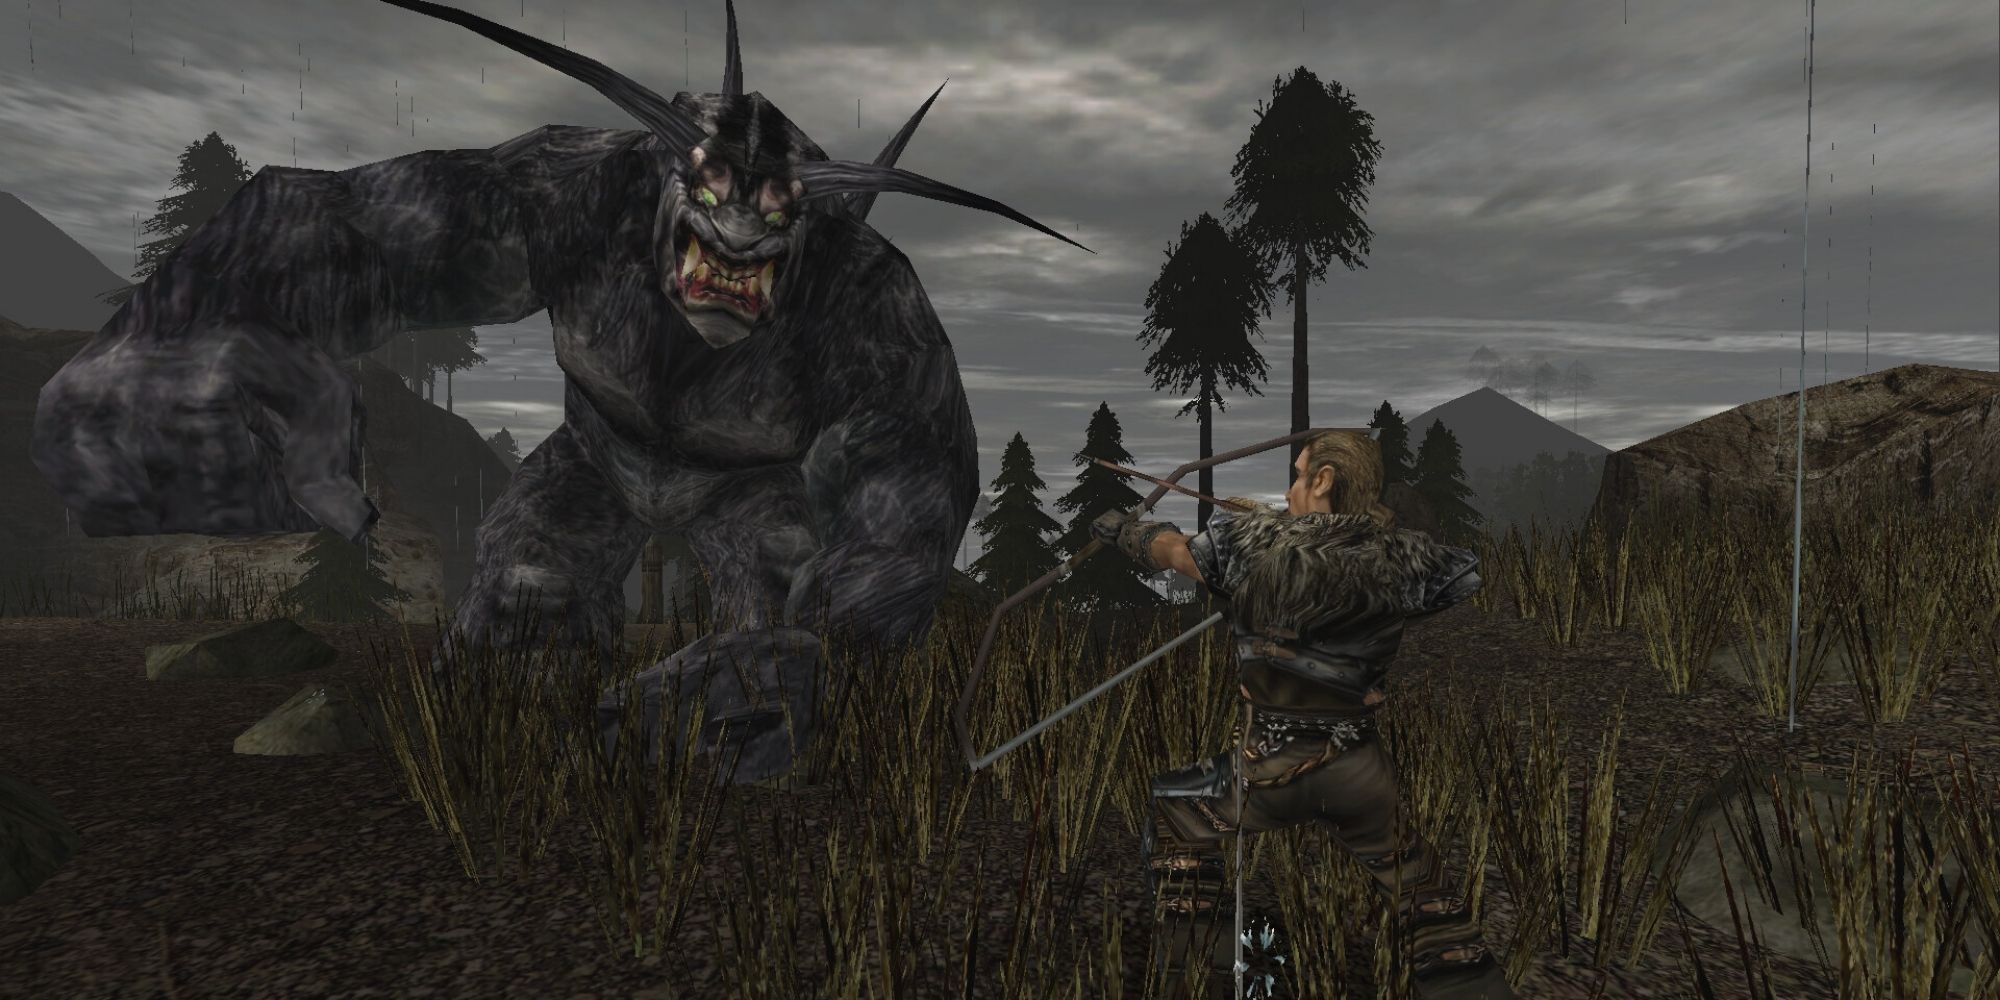 A player attacking a monster in the rain in Gothic 2